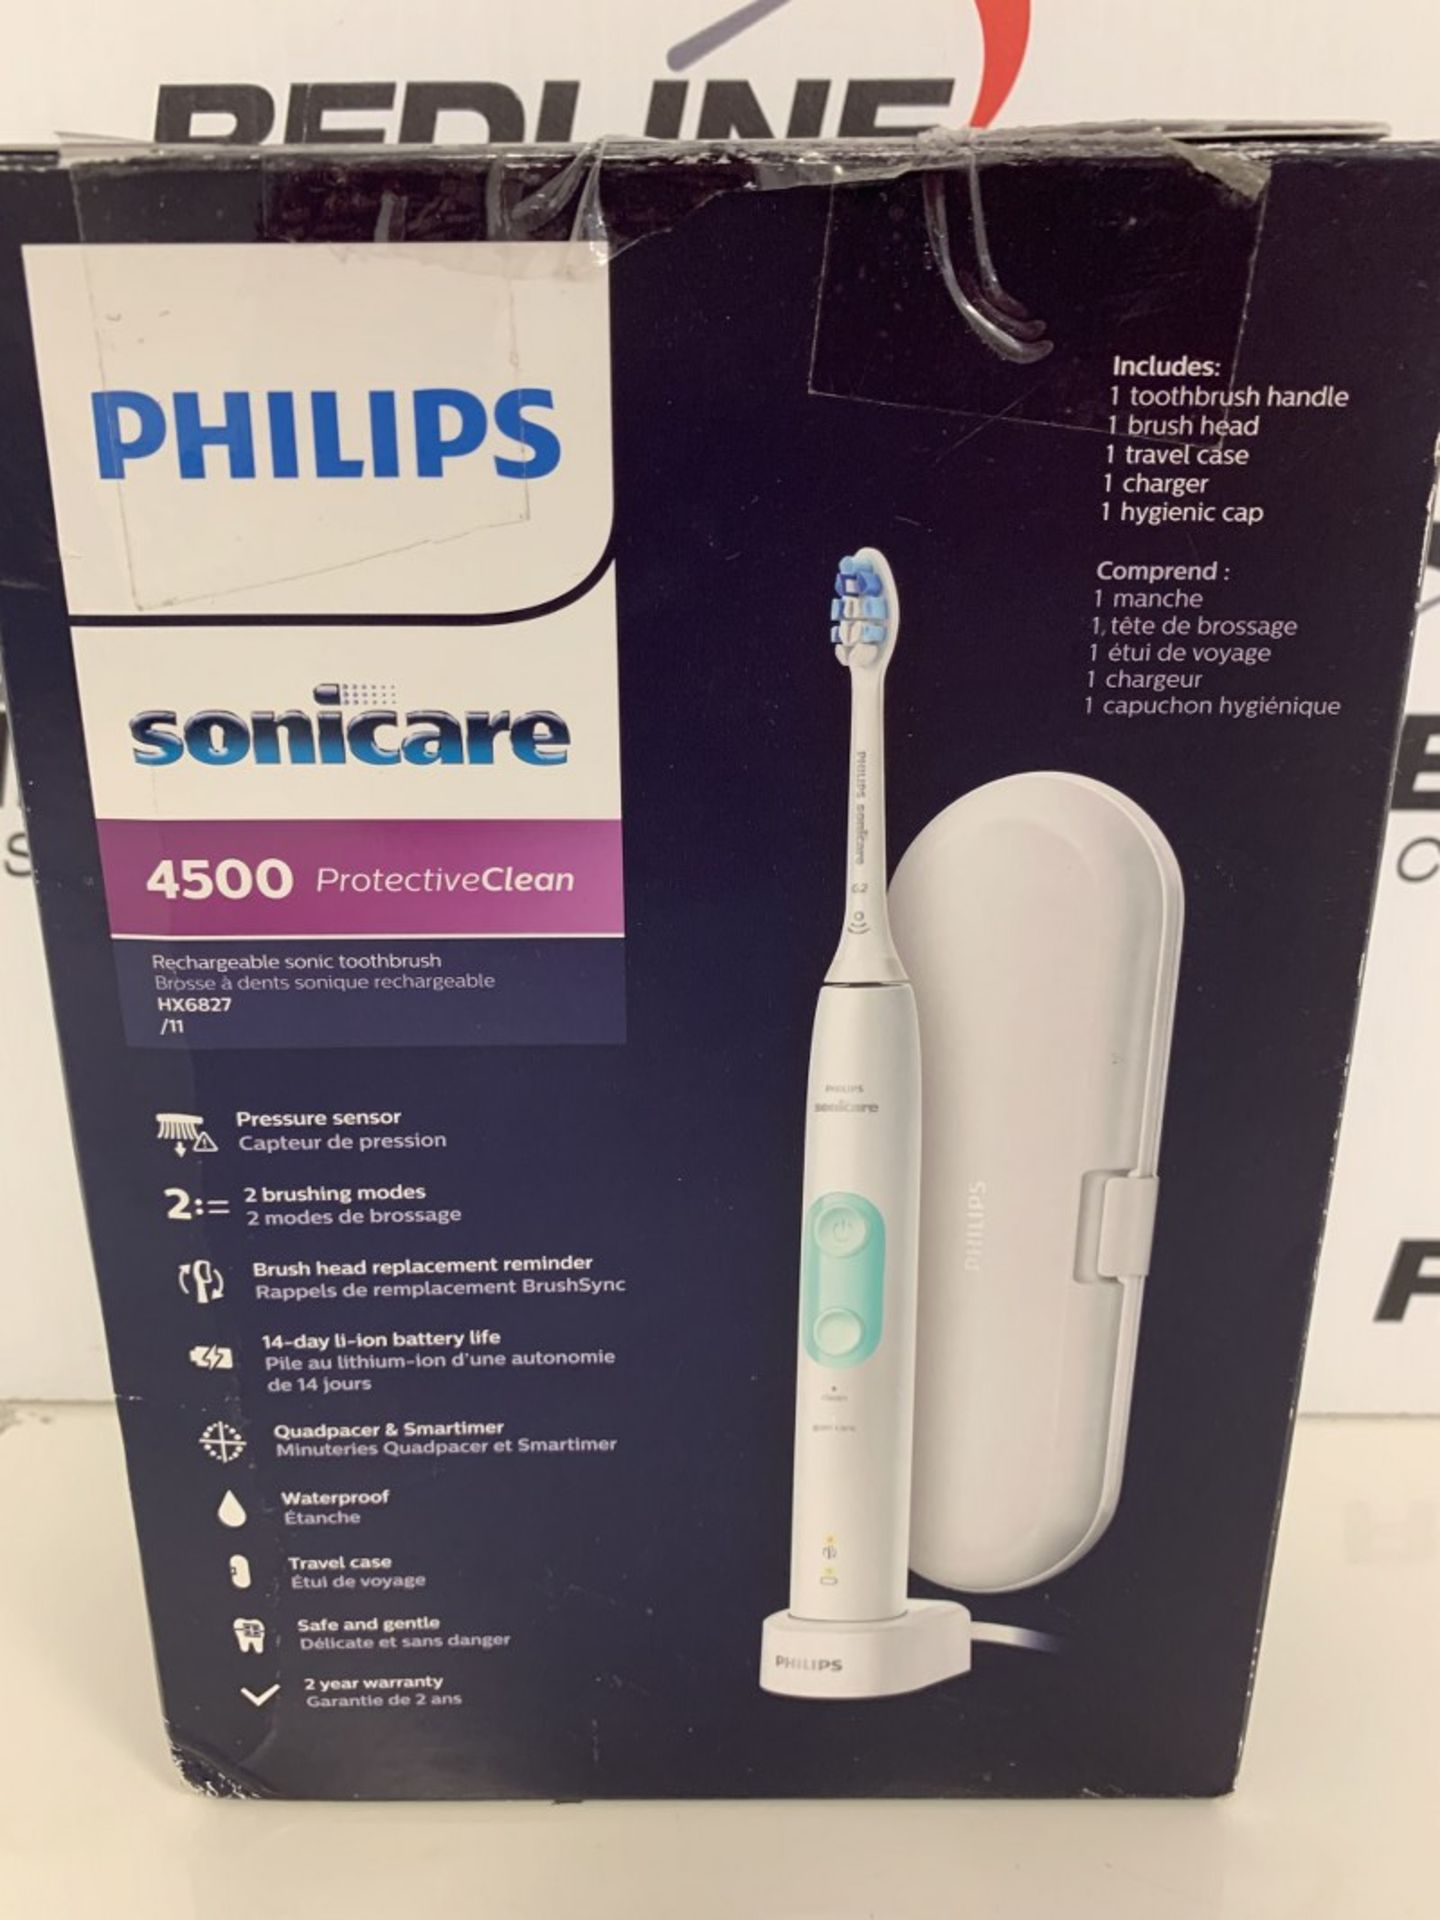 Philips - Sonicare 4500 - Power Toothbrush - Image 2 of 2